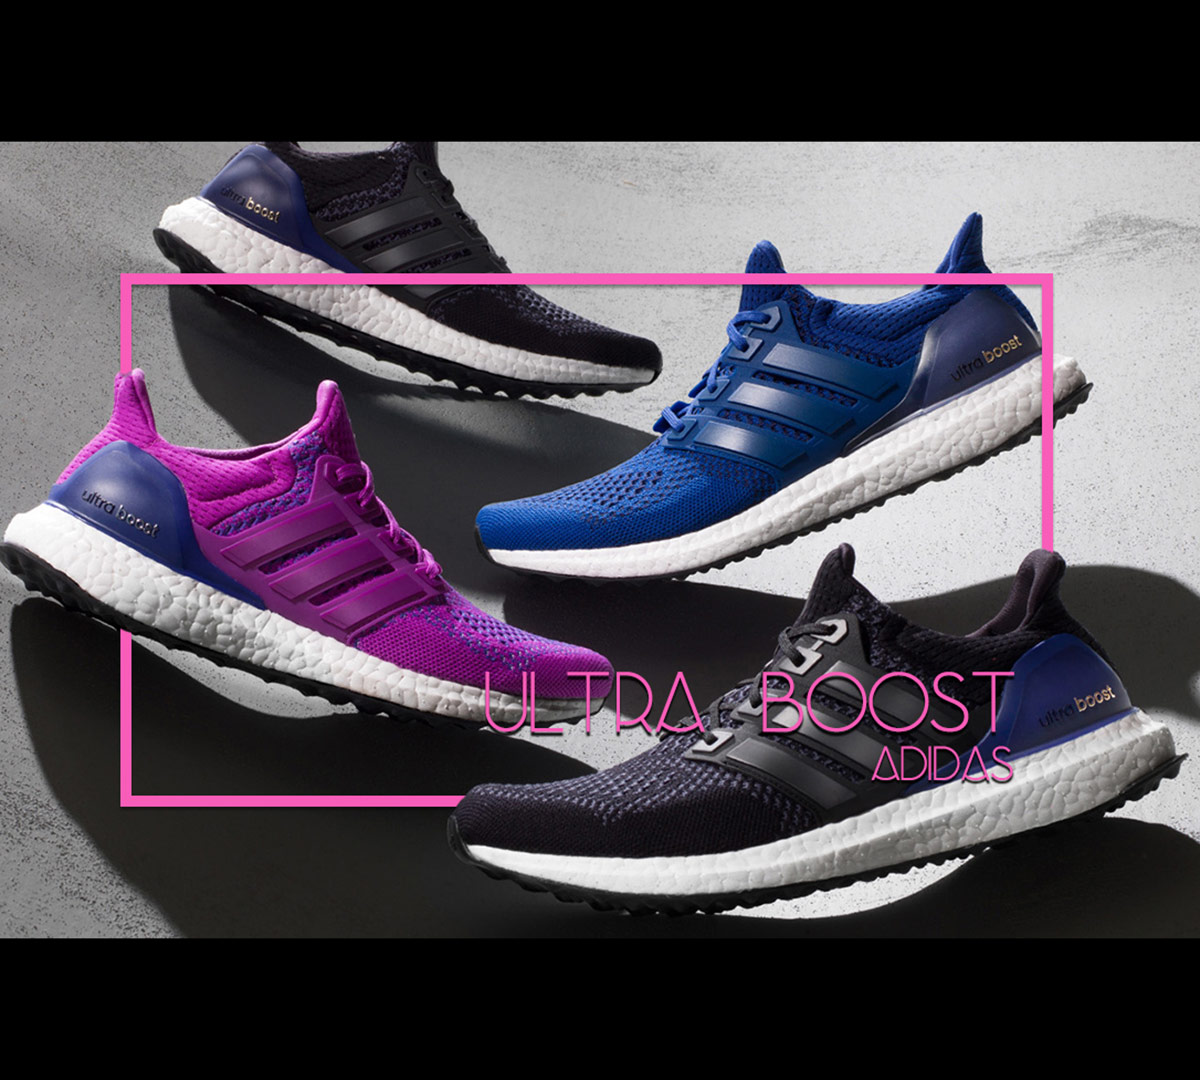 3 WAYS TO LACE ADIDAS ULTRA BOOST! 